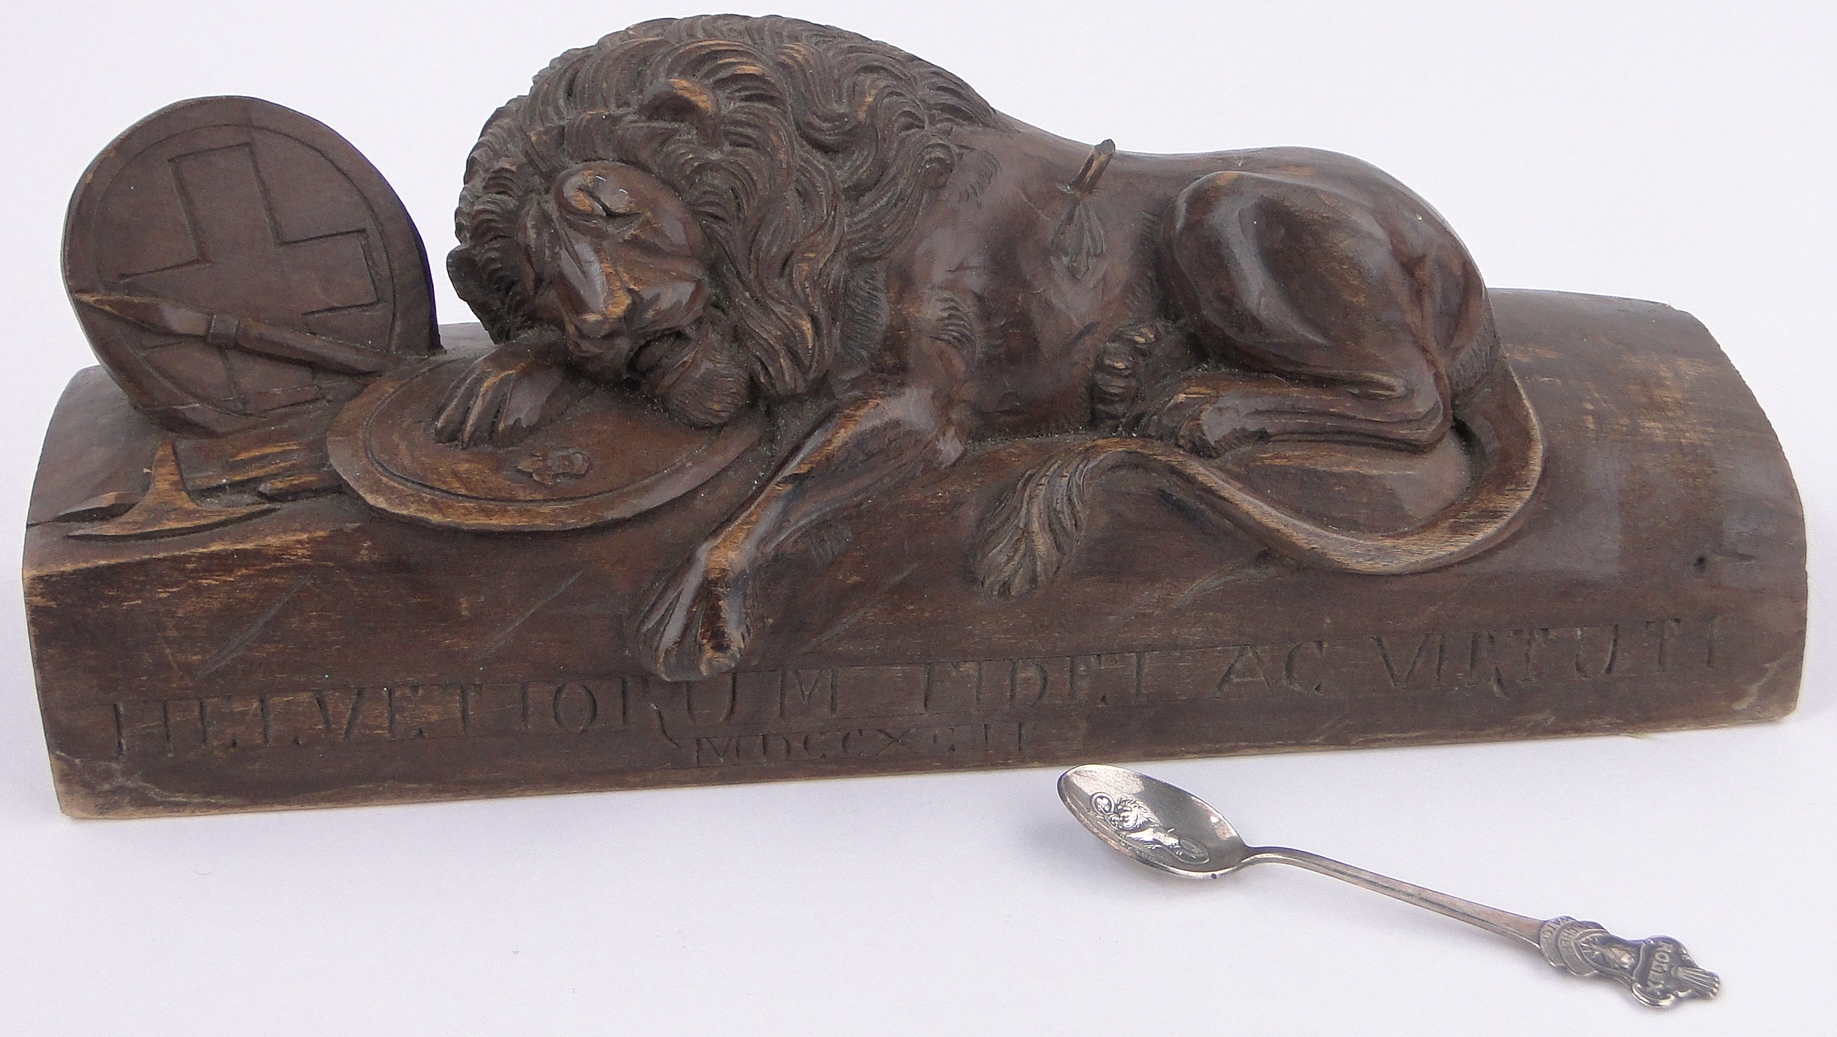 An Antique carved and stained wood heraldic lion, inscribed on base with date 1792, length 11.5".